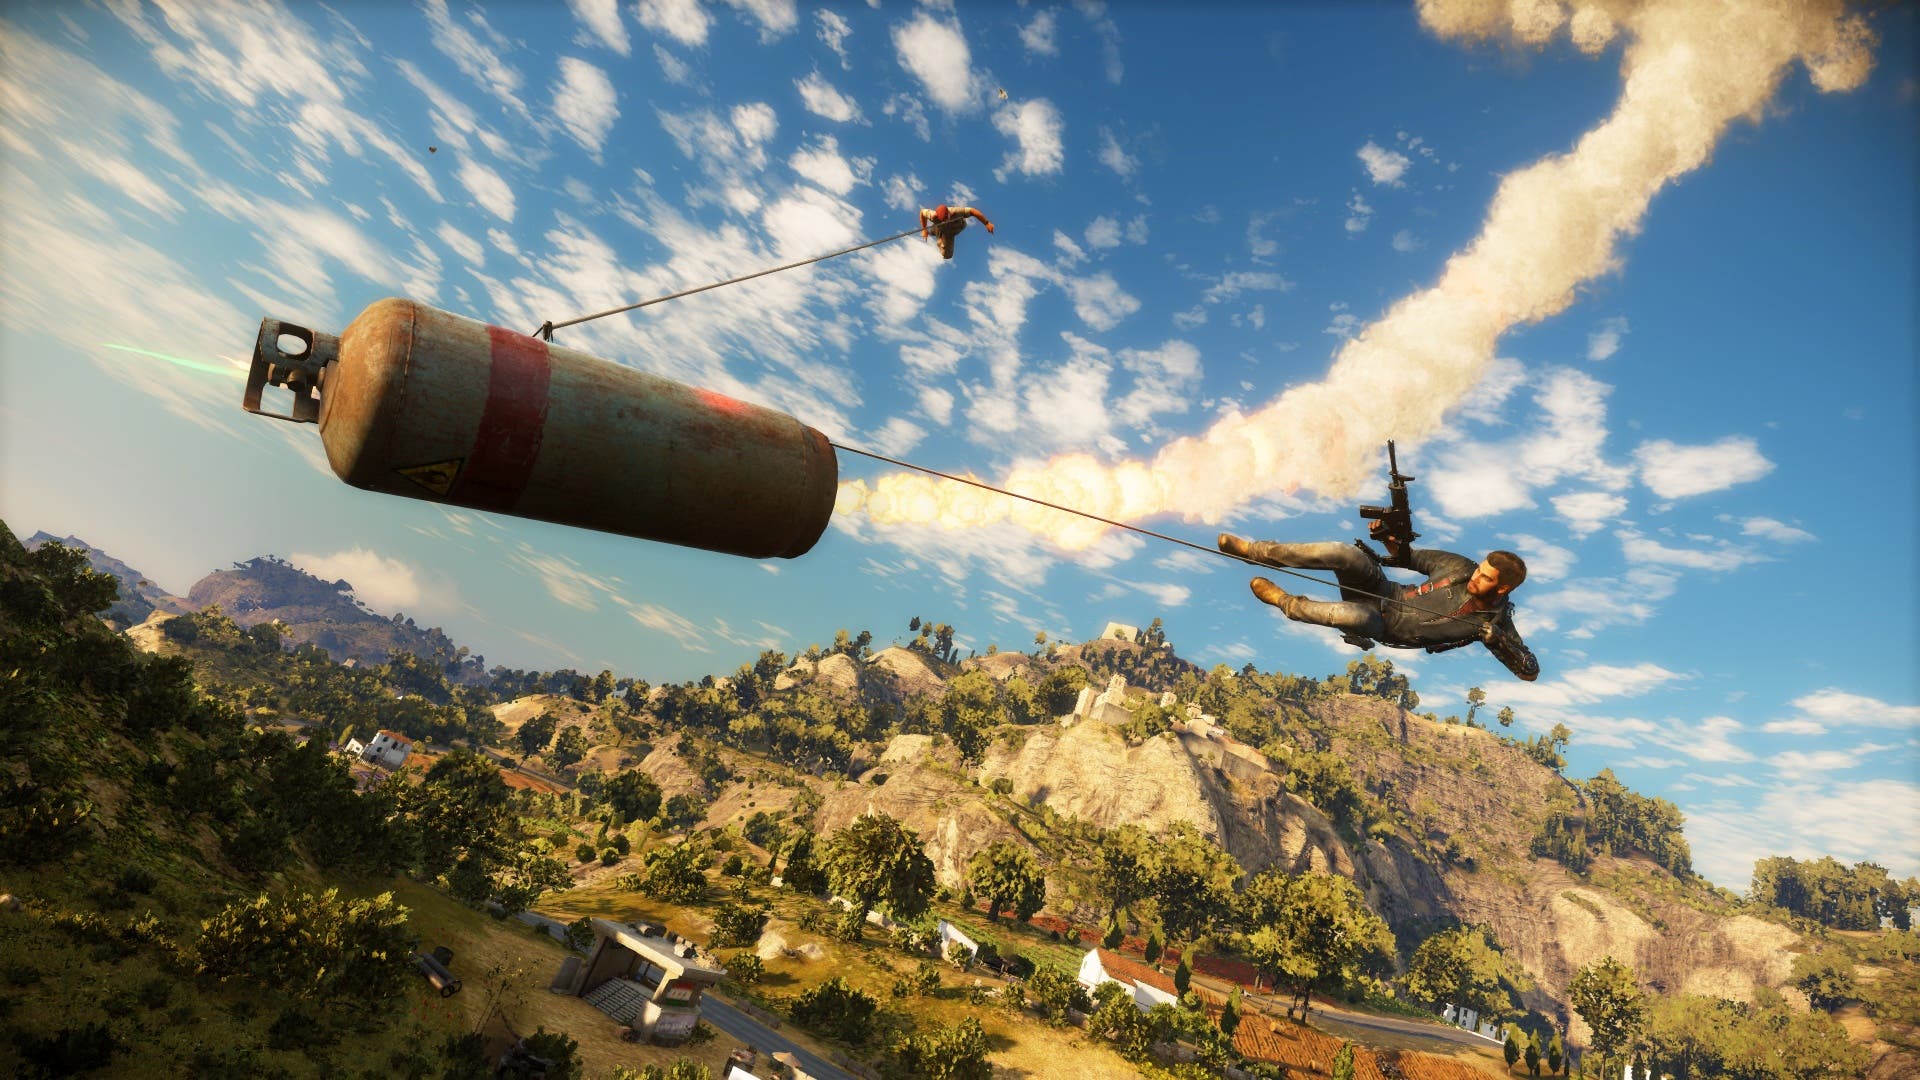 JustCause3-review(7)